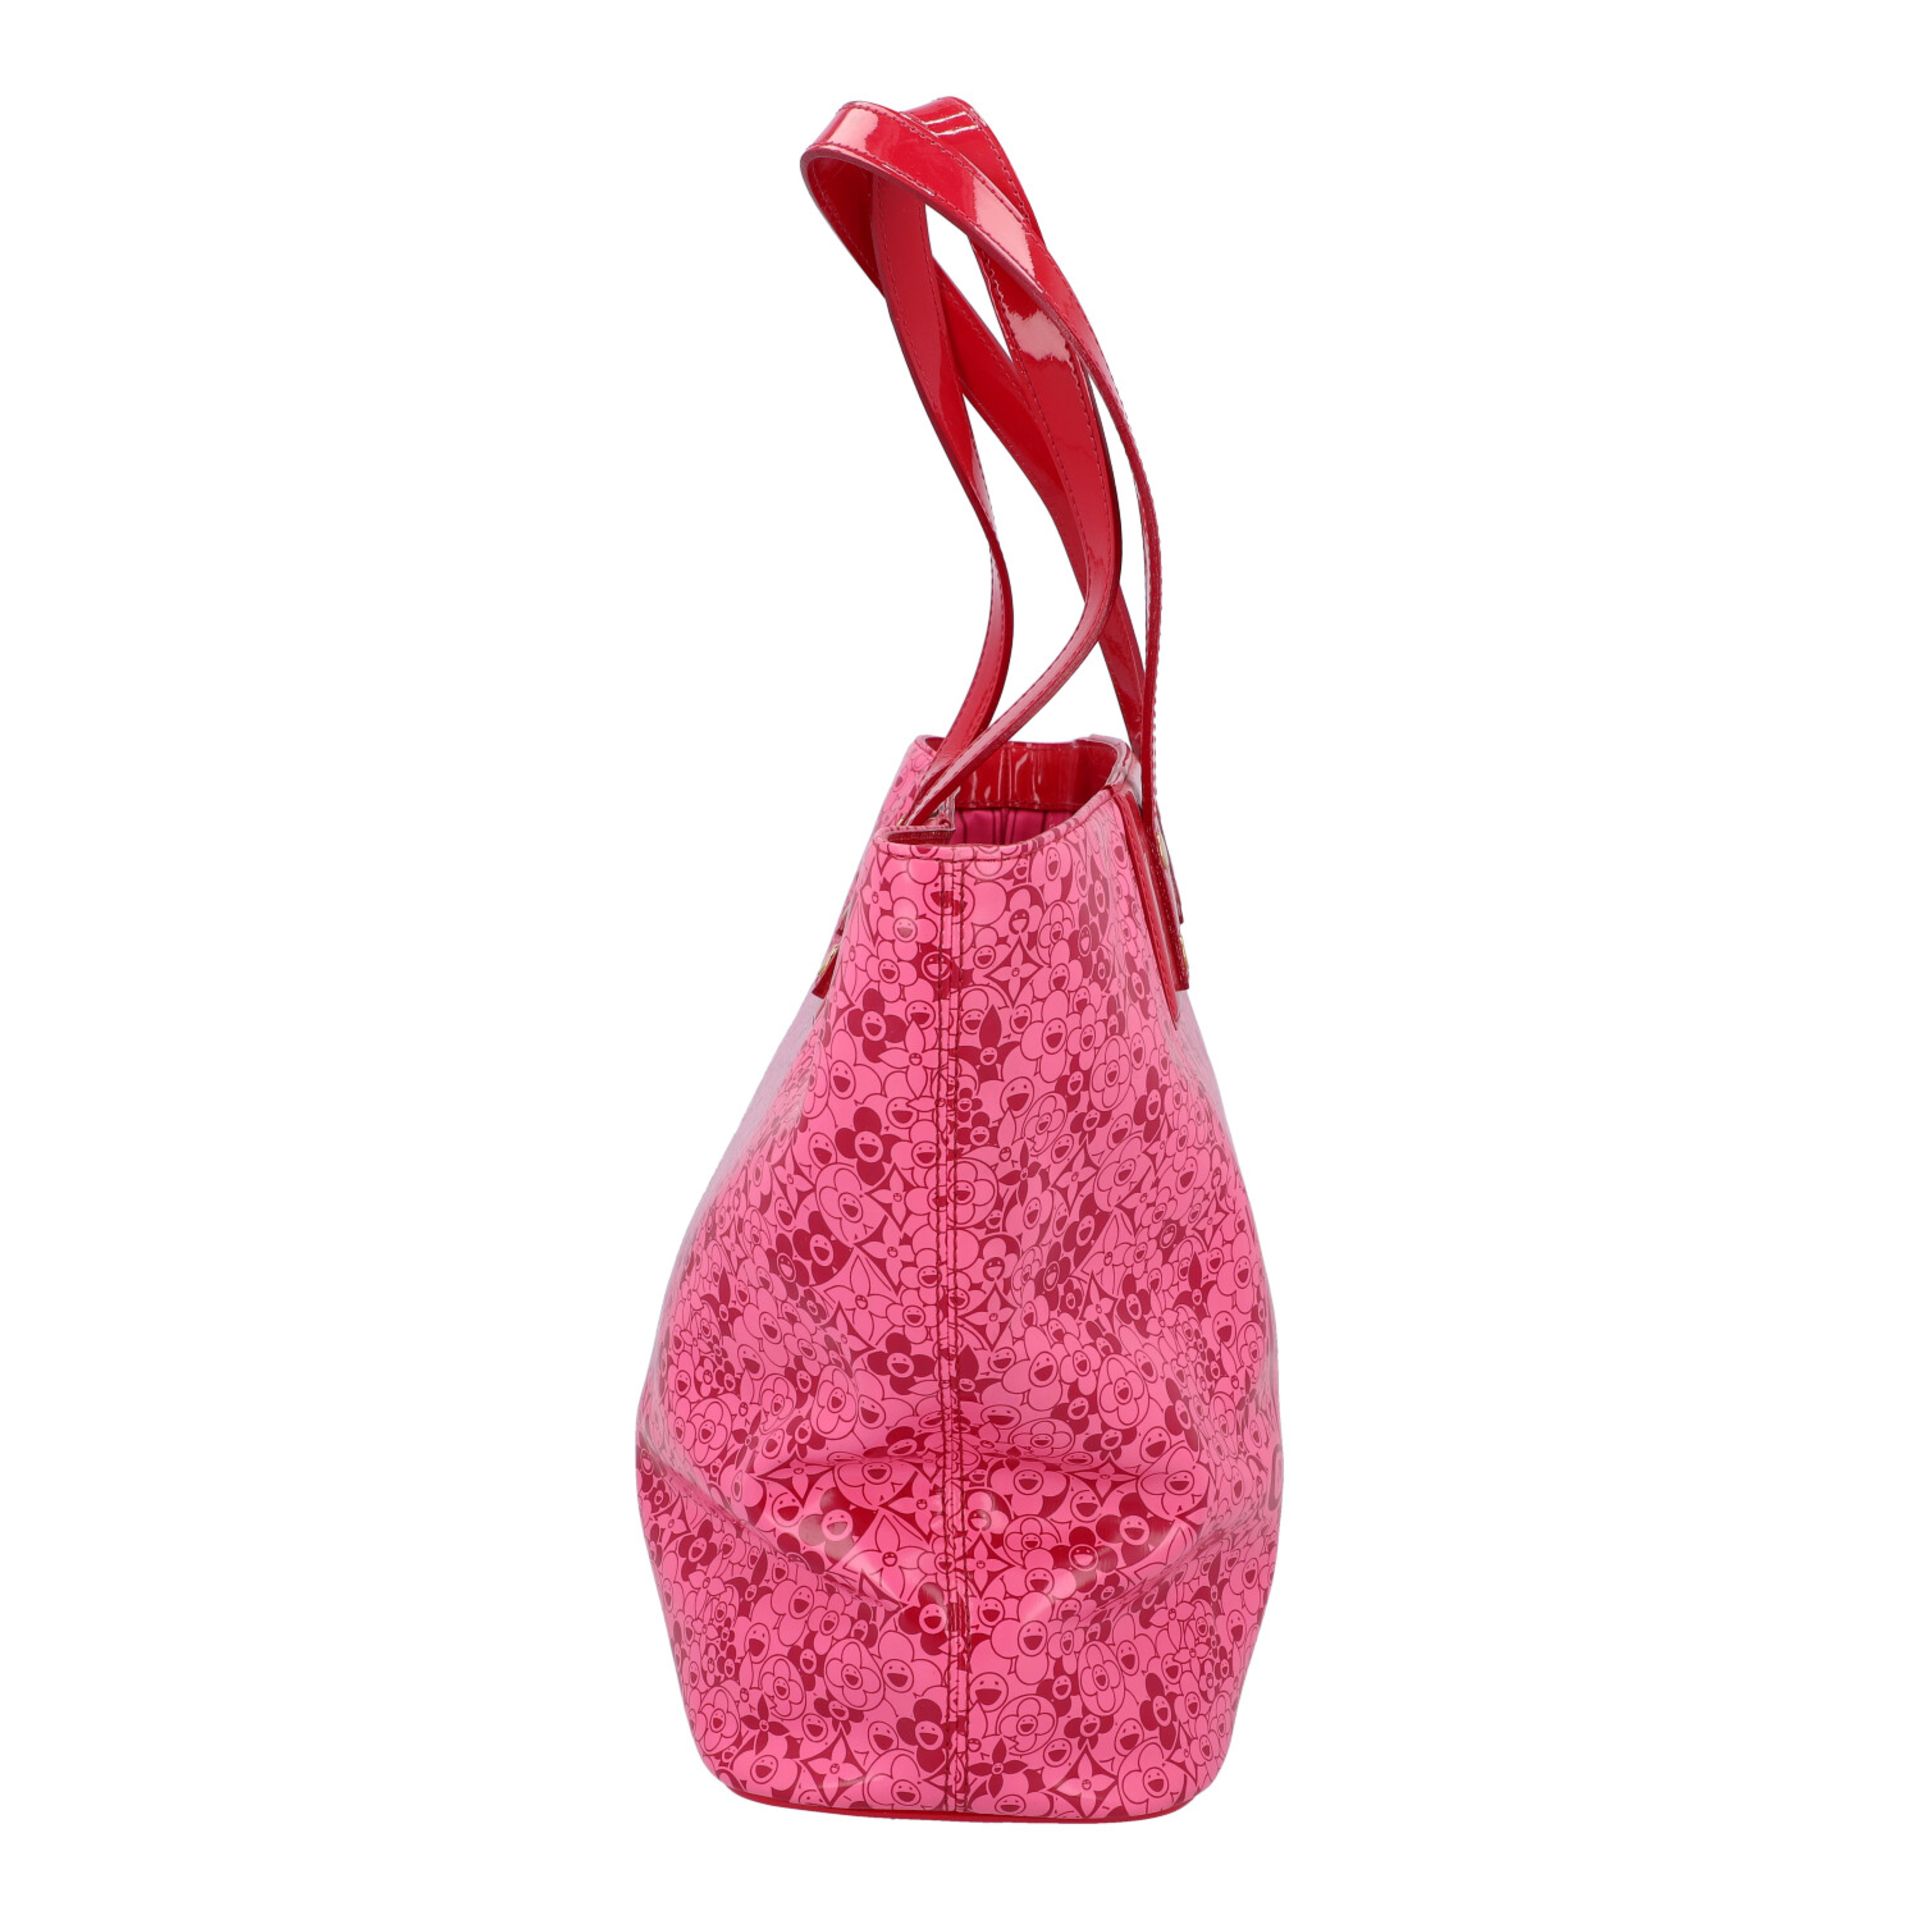 LOUIS VUITTON Shopper "COSMIC BLOSSOM TOTE". - Image 3 of 8